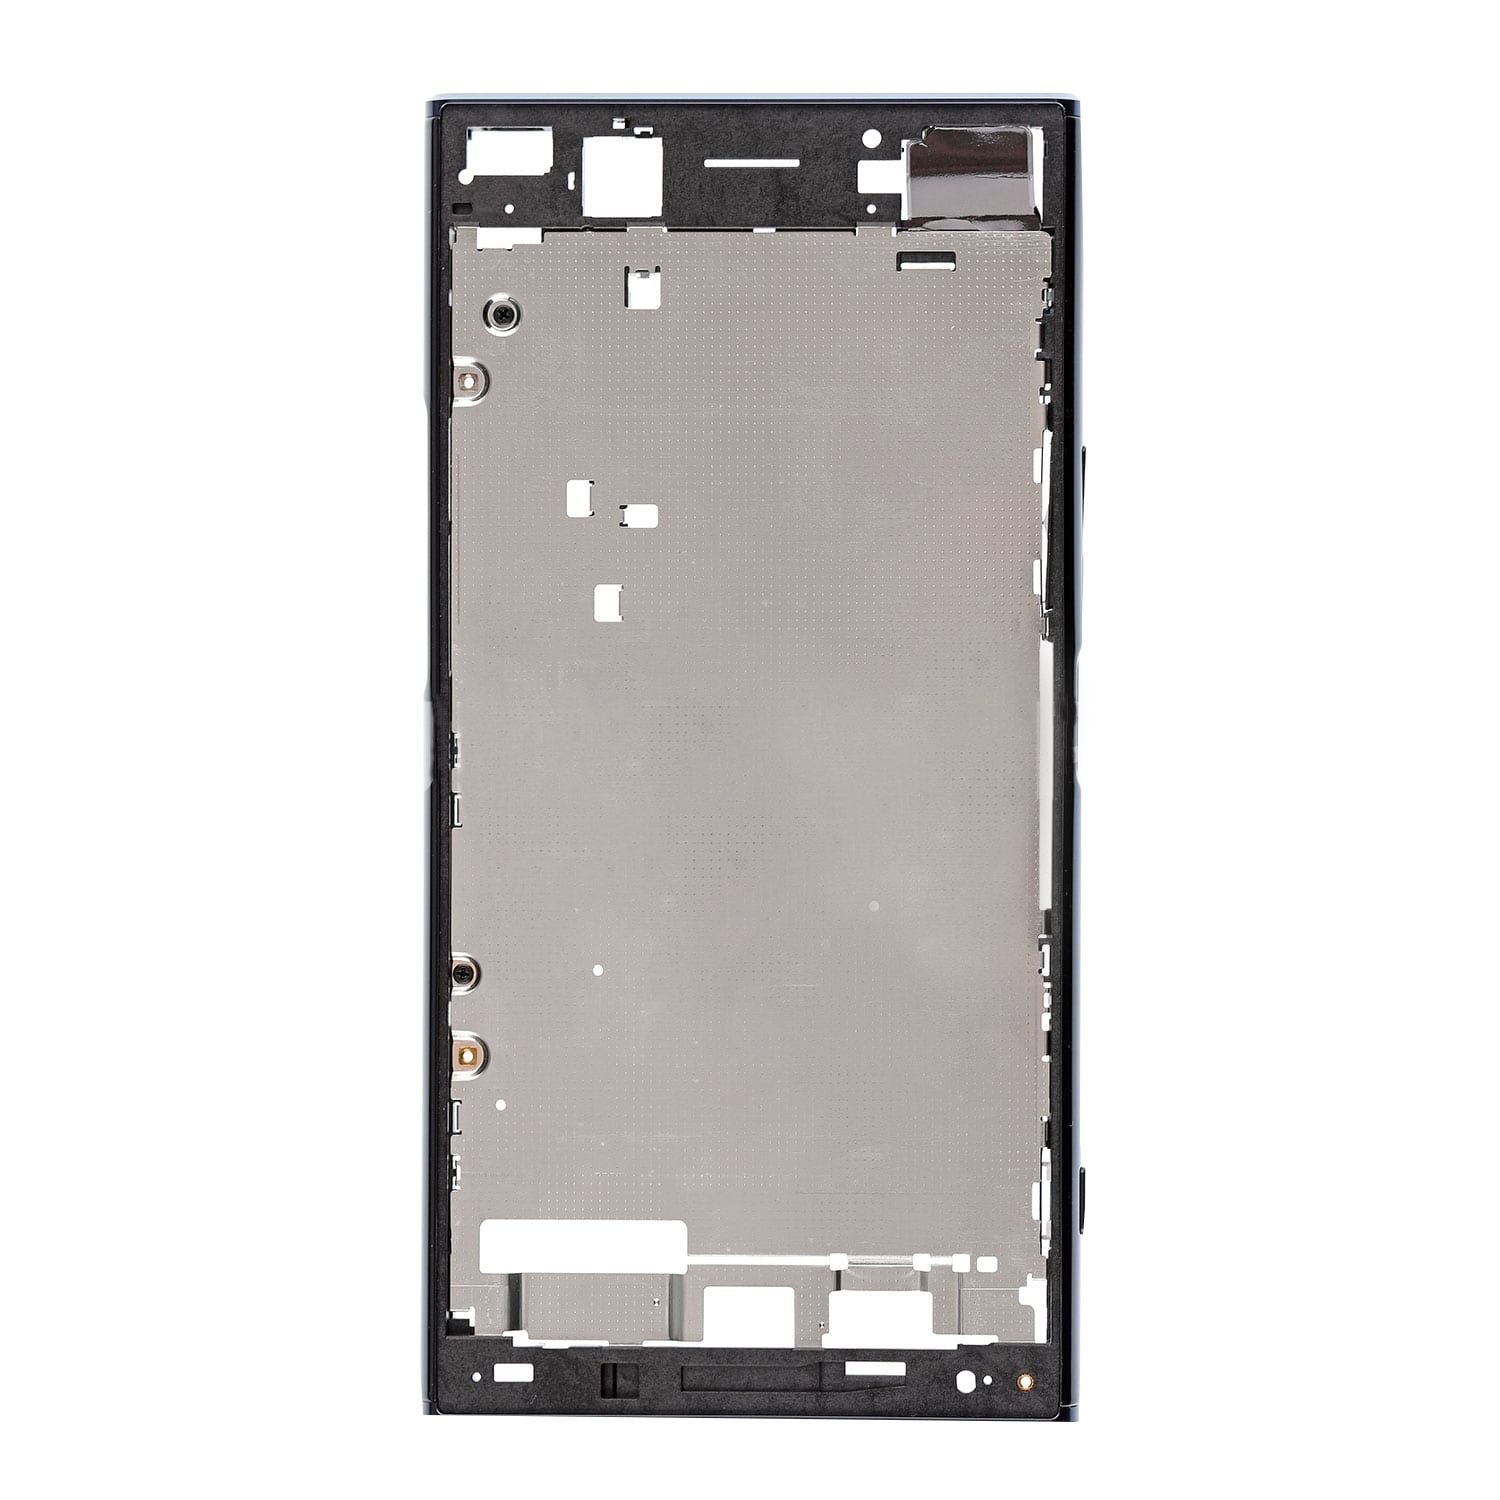 Replacement Front Housing LCD Frame Bezel Plate Compatible With Sony Xperia XZ Premium - Black